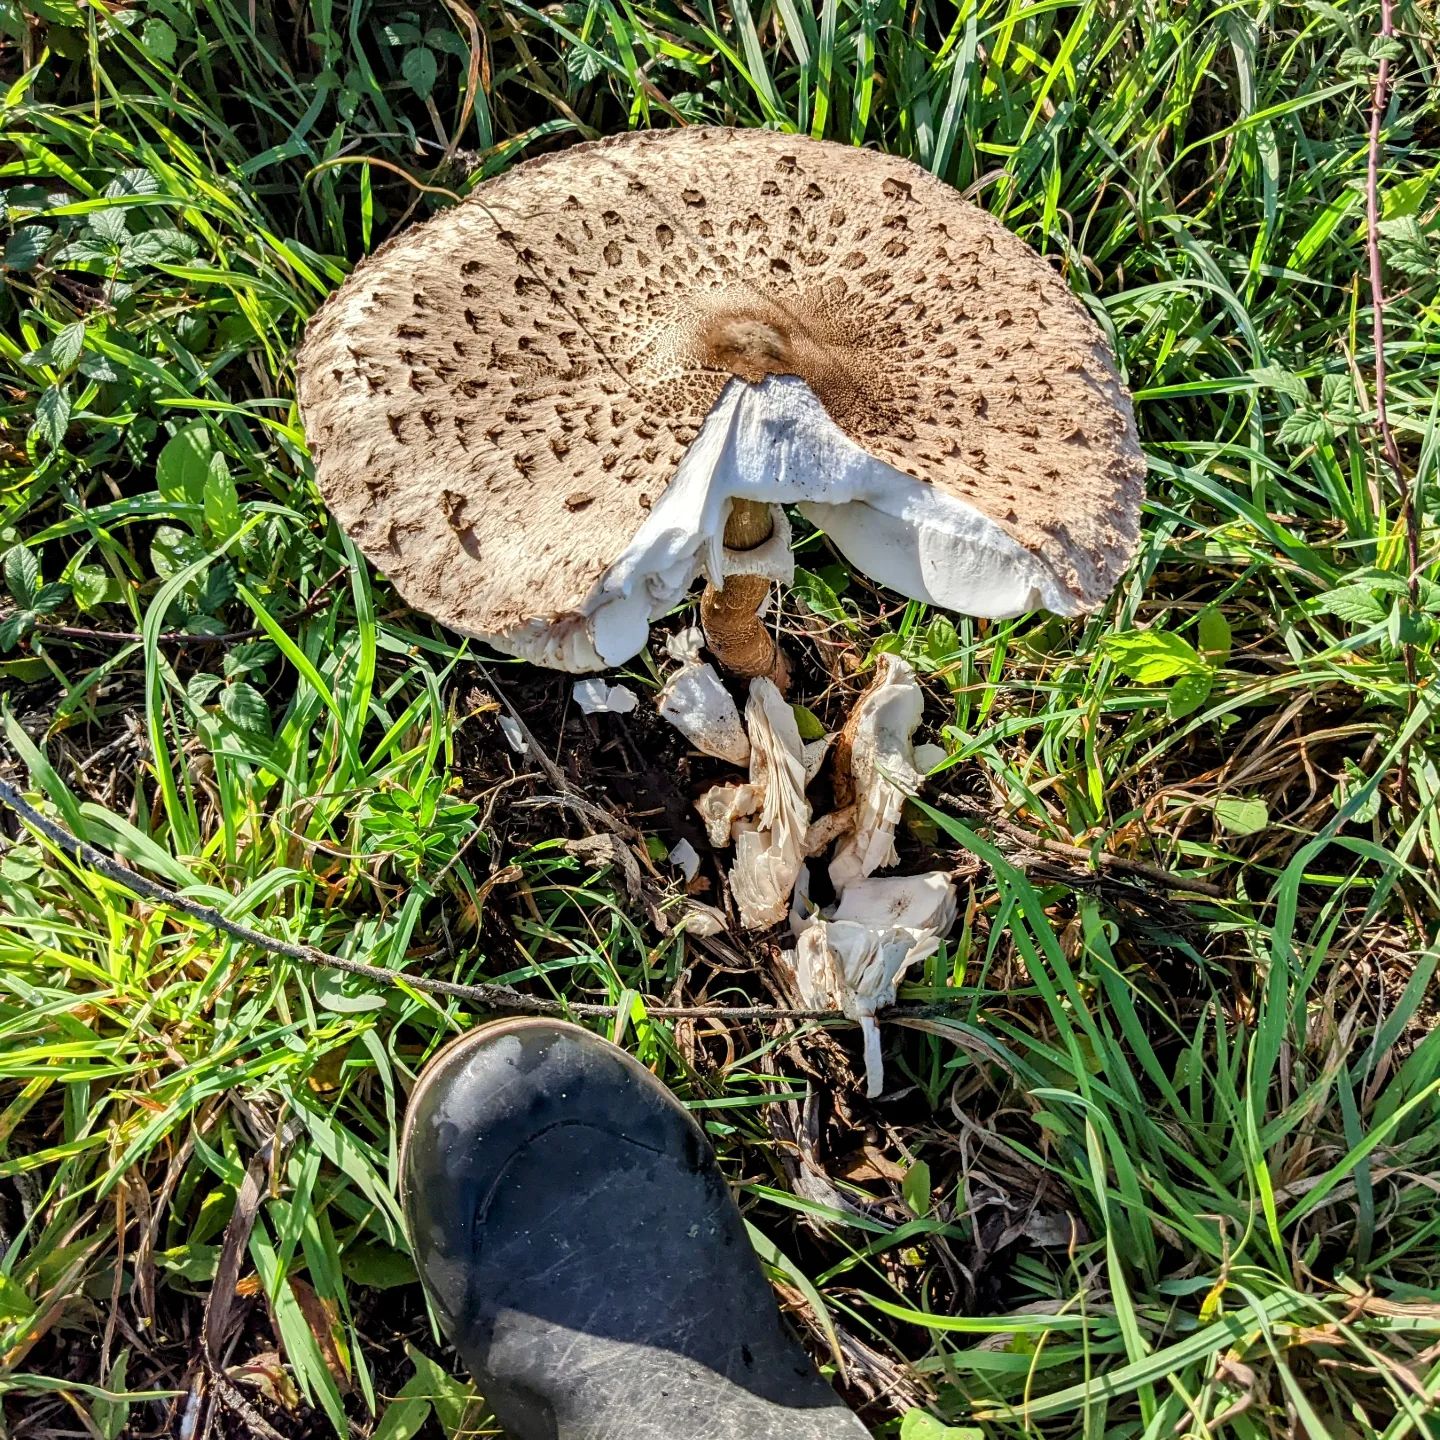 There's been a lot of mushrooms popping up given all the rain, but this one is by far the largest I've seen so far